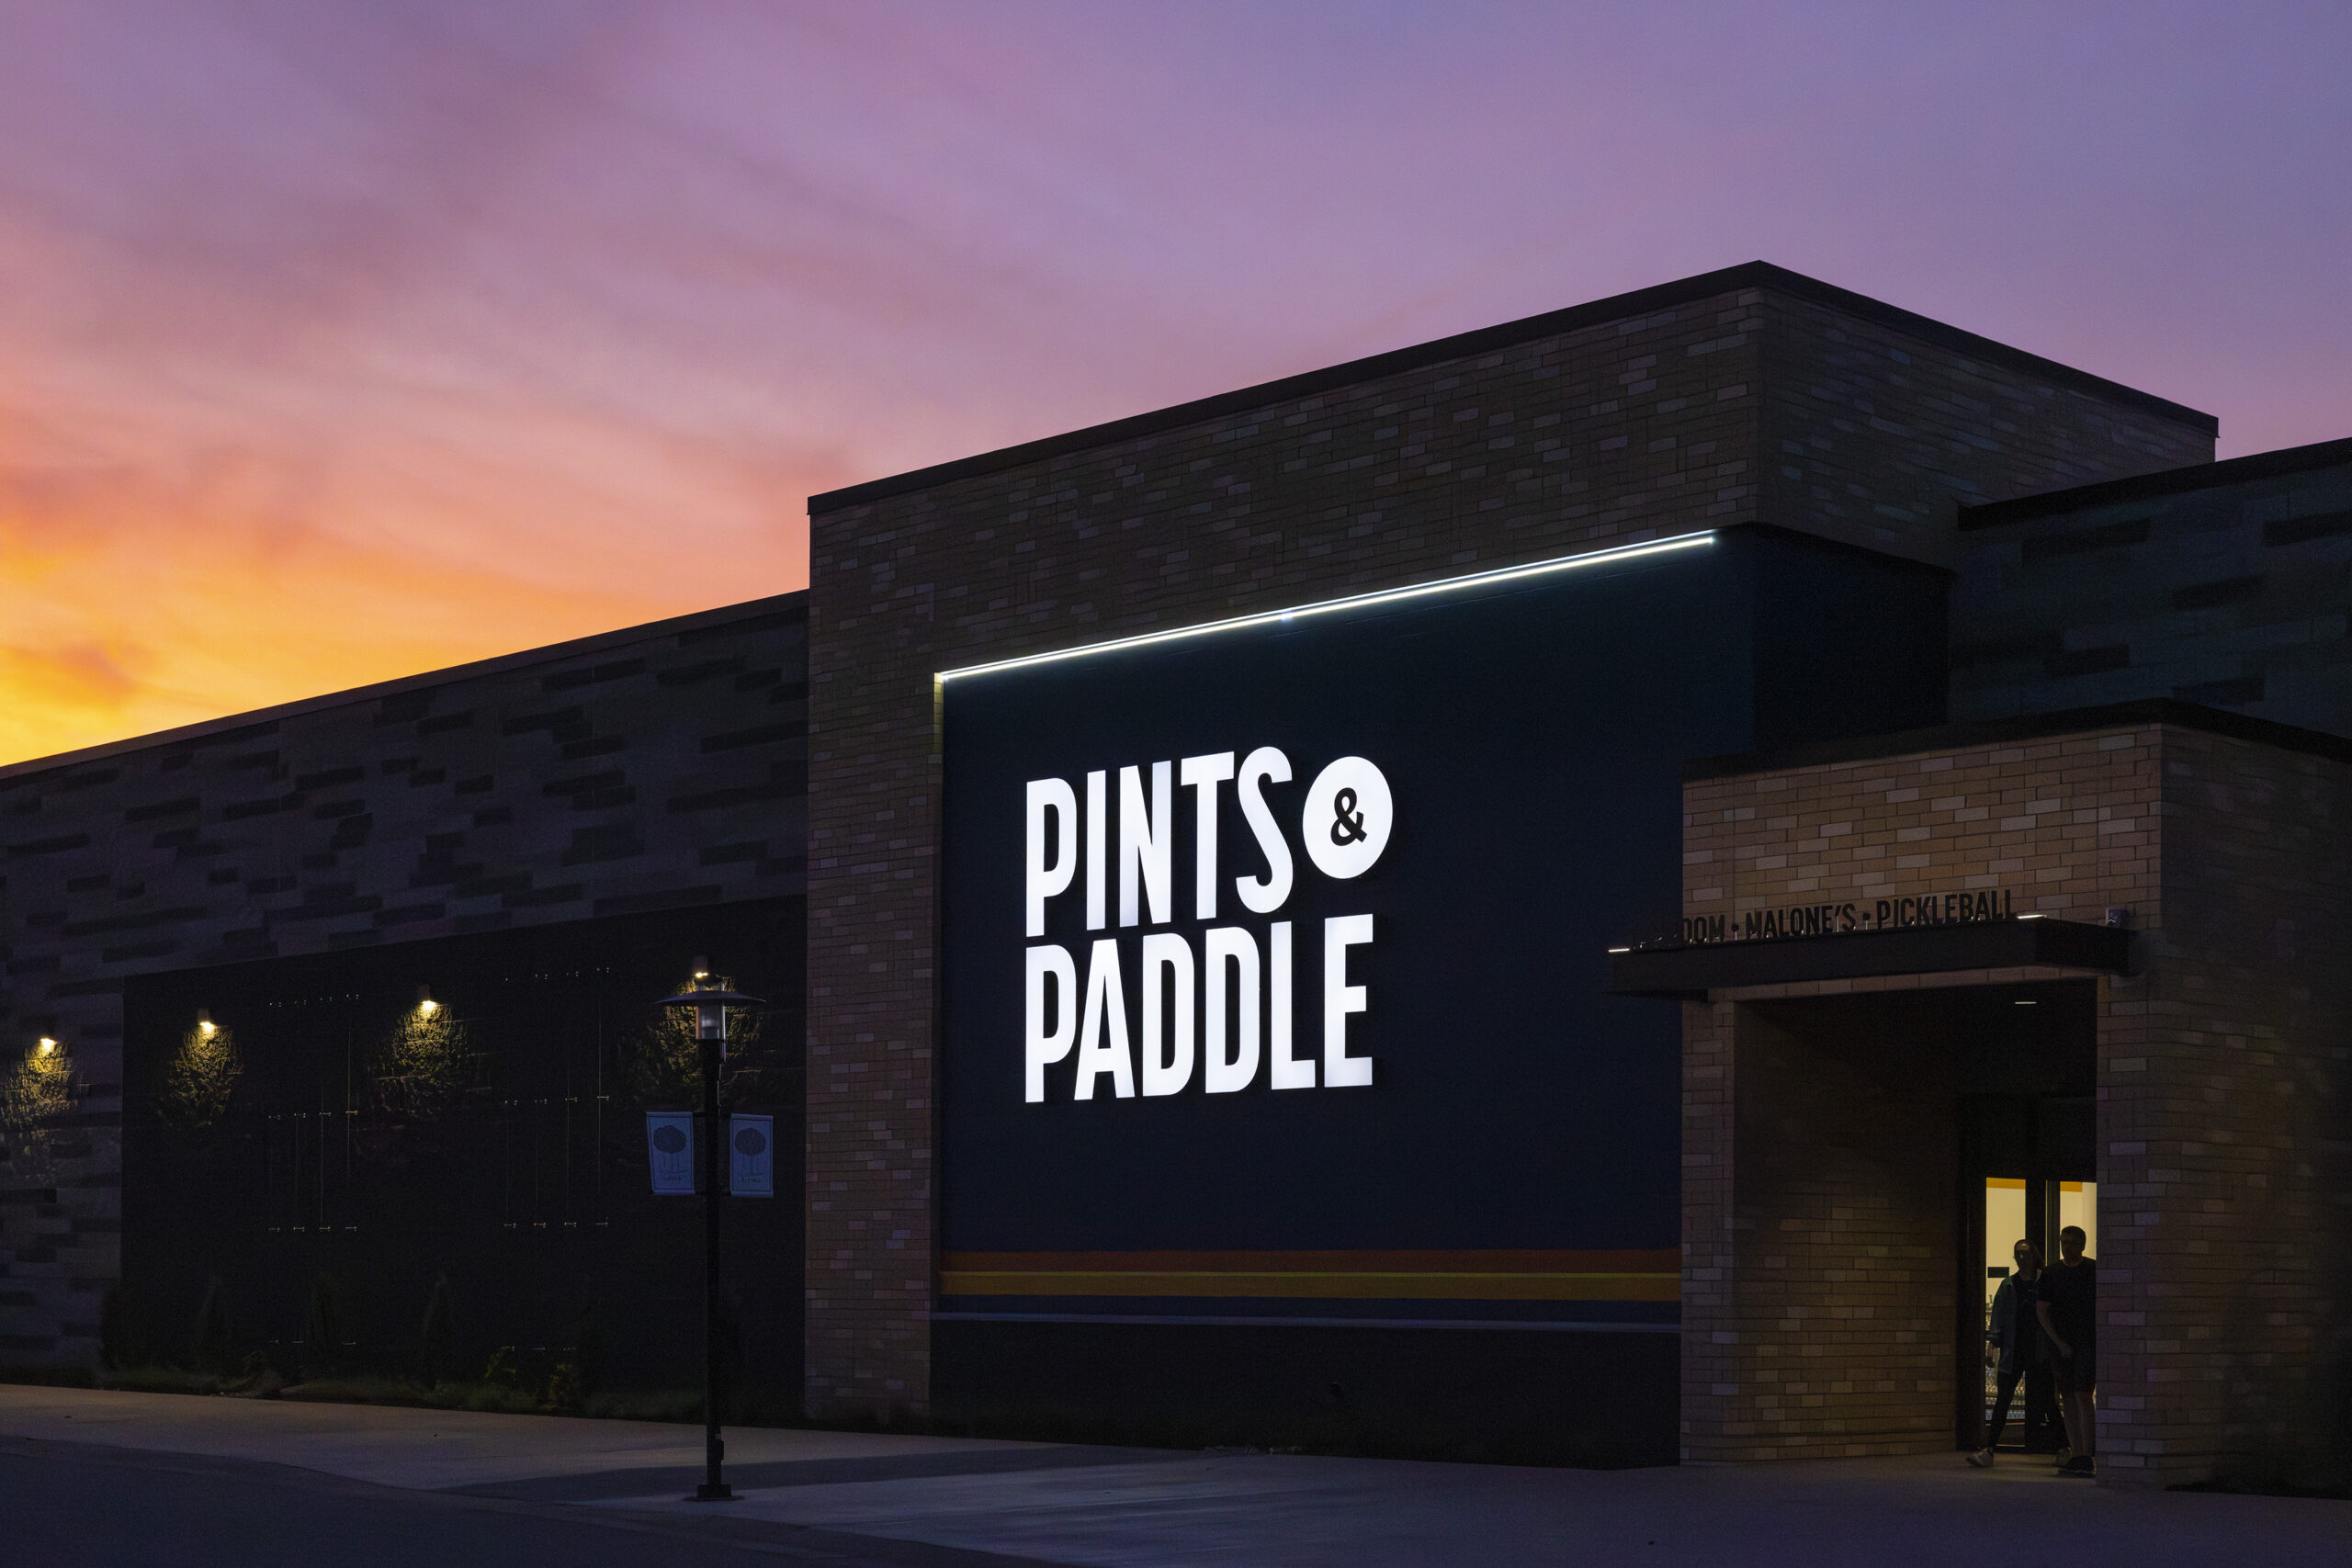 Pints & Paddle is a family-owned, multifaceted entertainment venue located in Maple Grove, MN offering 10 indoor pickleball courts and a vibrant sports bar with more than 70 taps, live music and gourmet food.